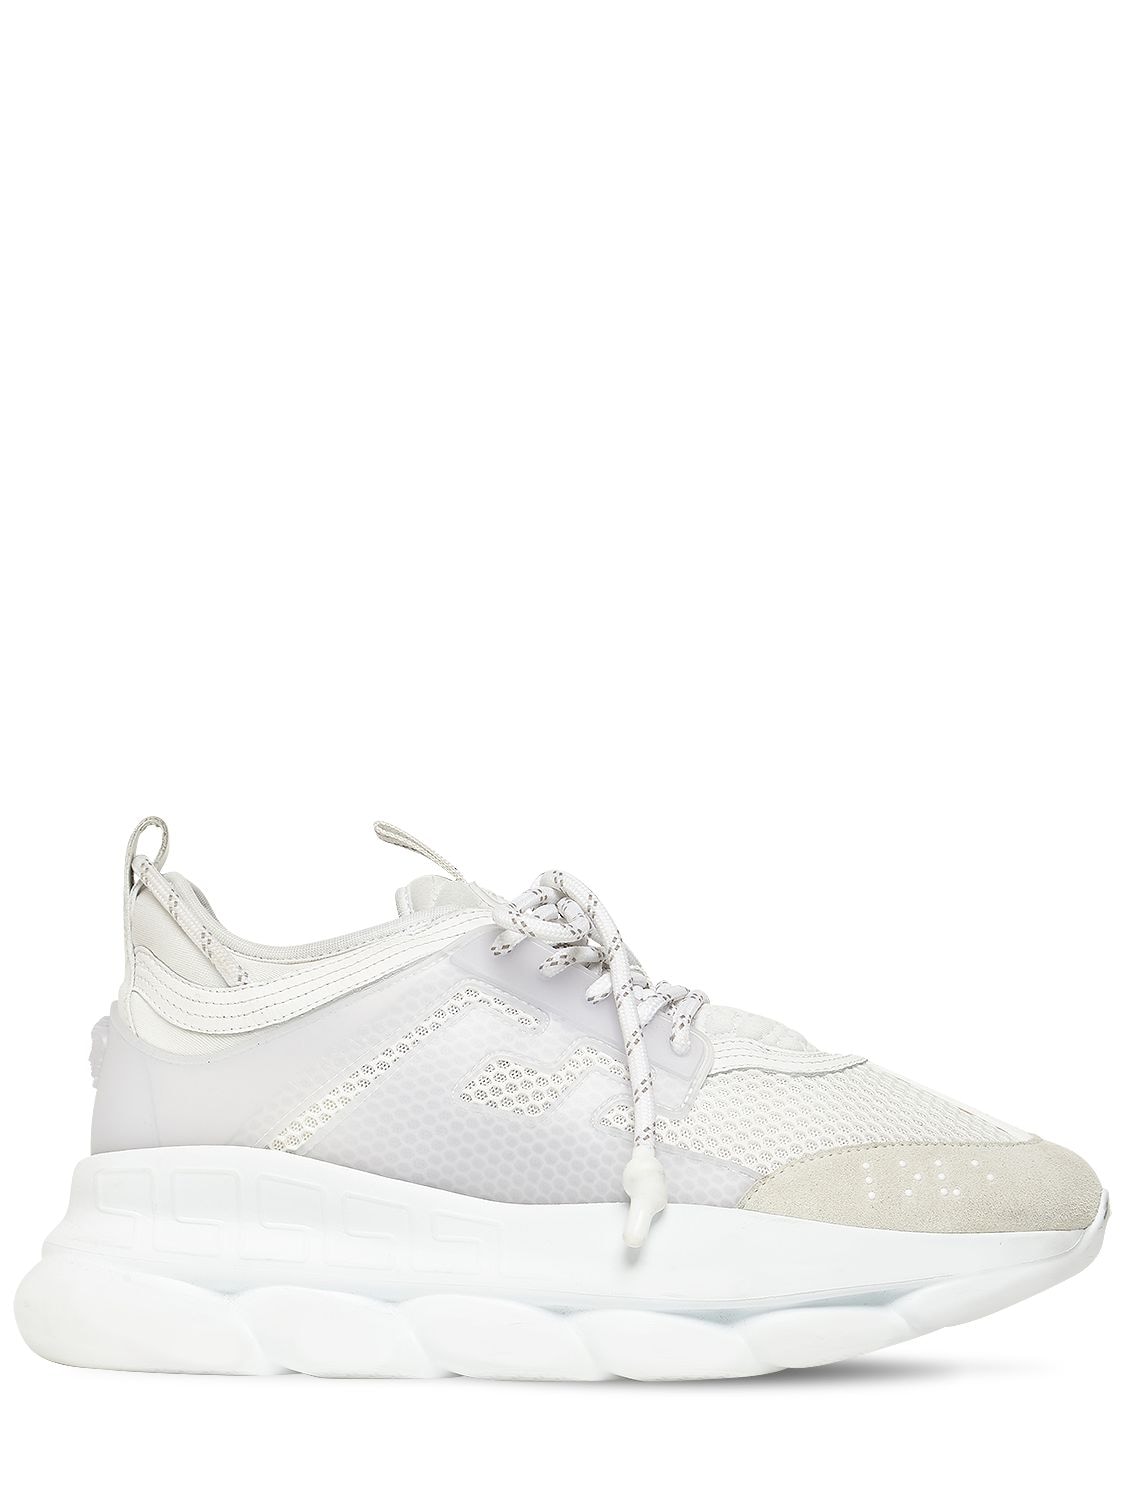 Versace Versace CHAIN REACTION Sneakers - Stylemyle